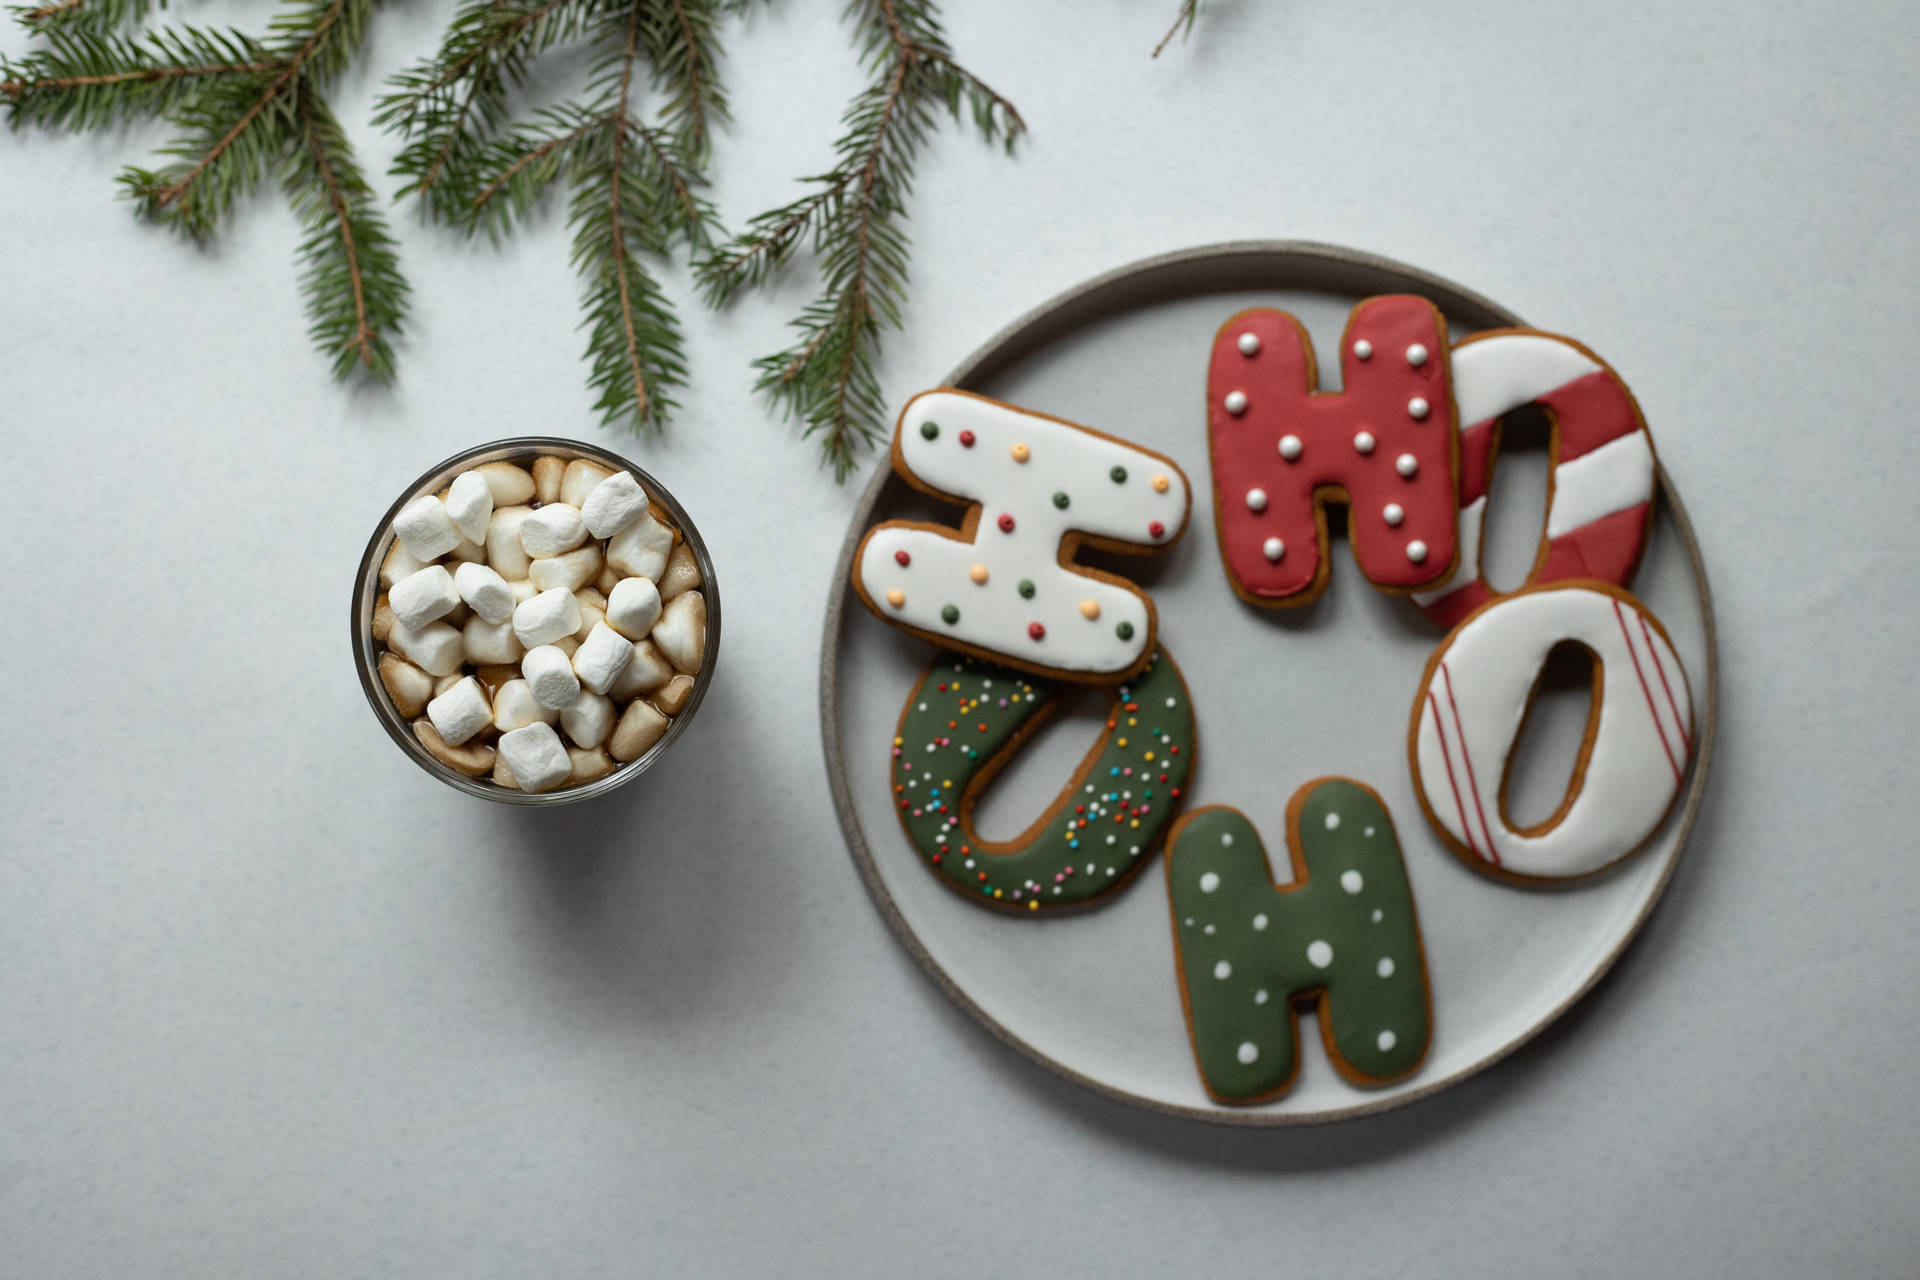 Delectable Christmas Cookies Decorated With Chocolate Wallpaper